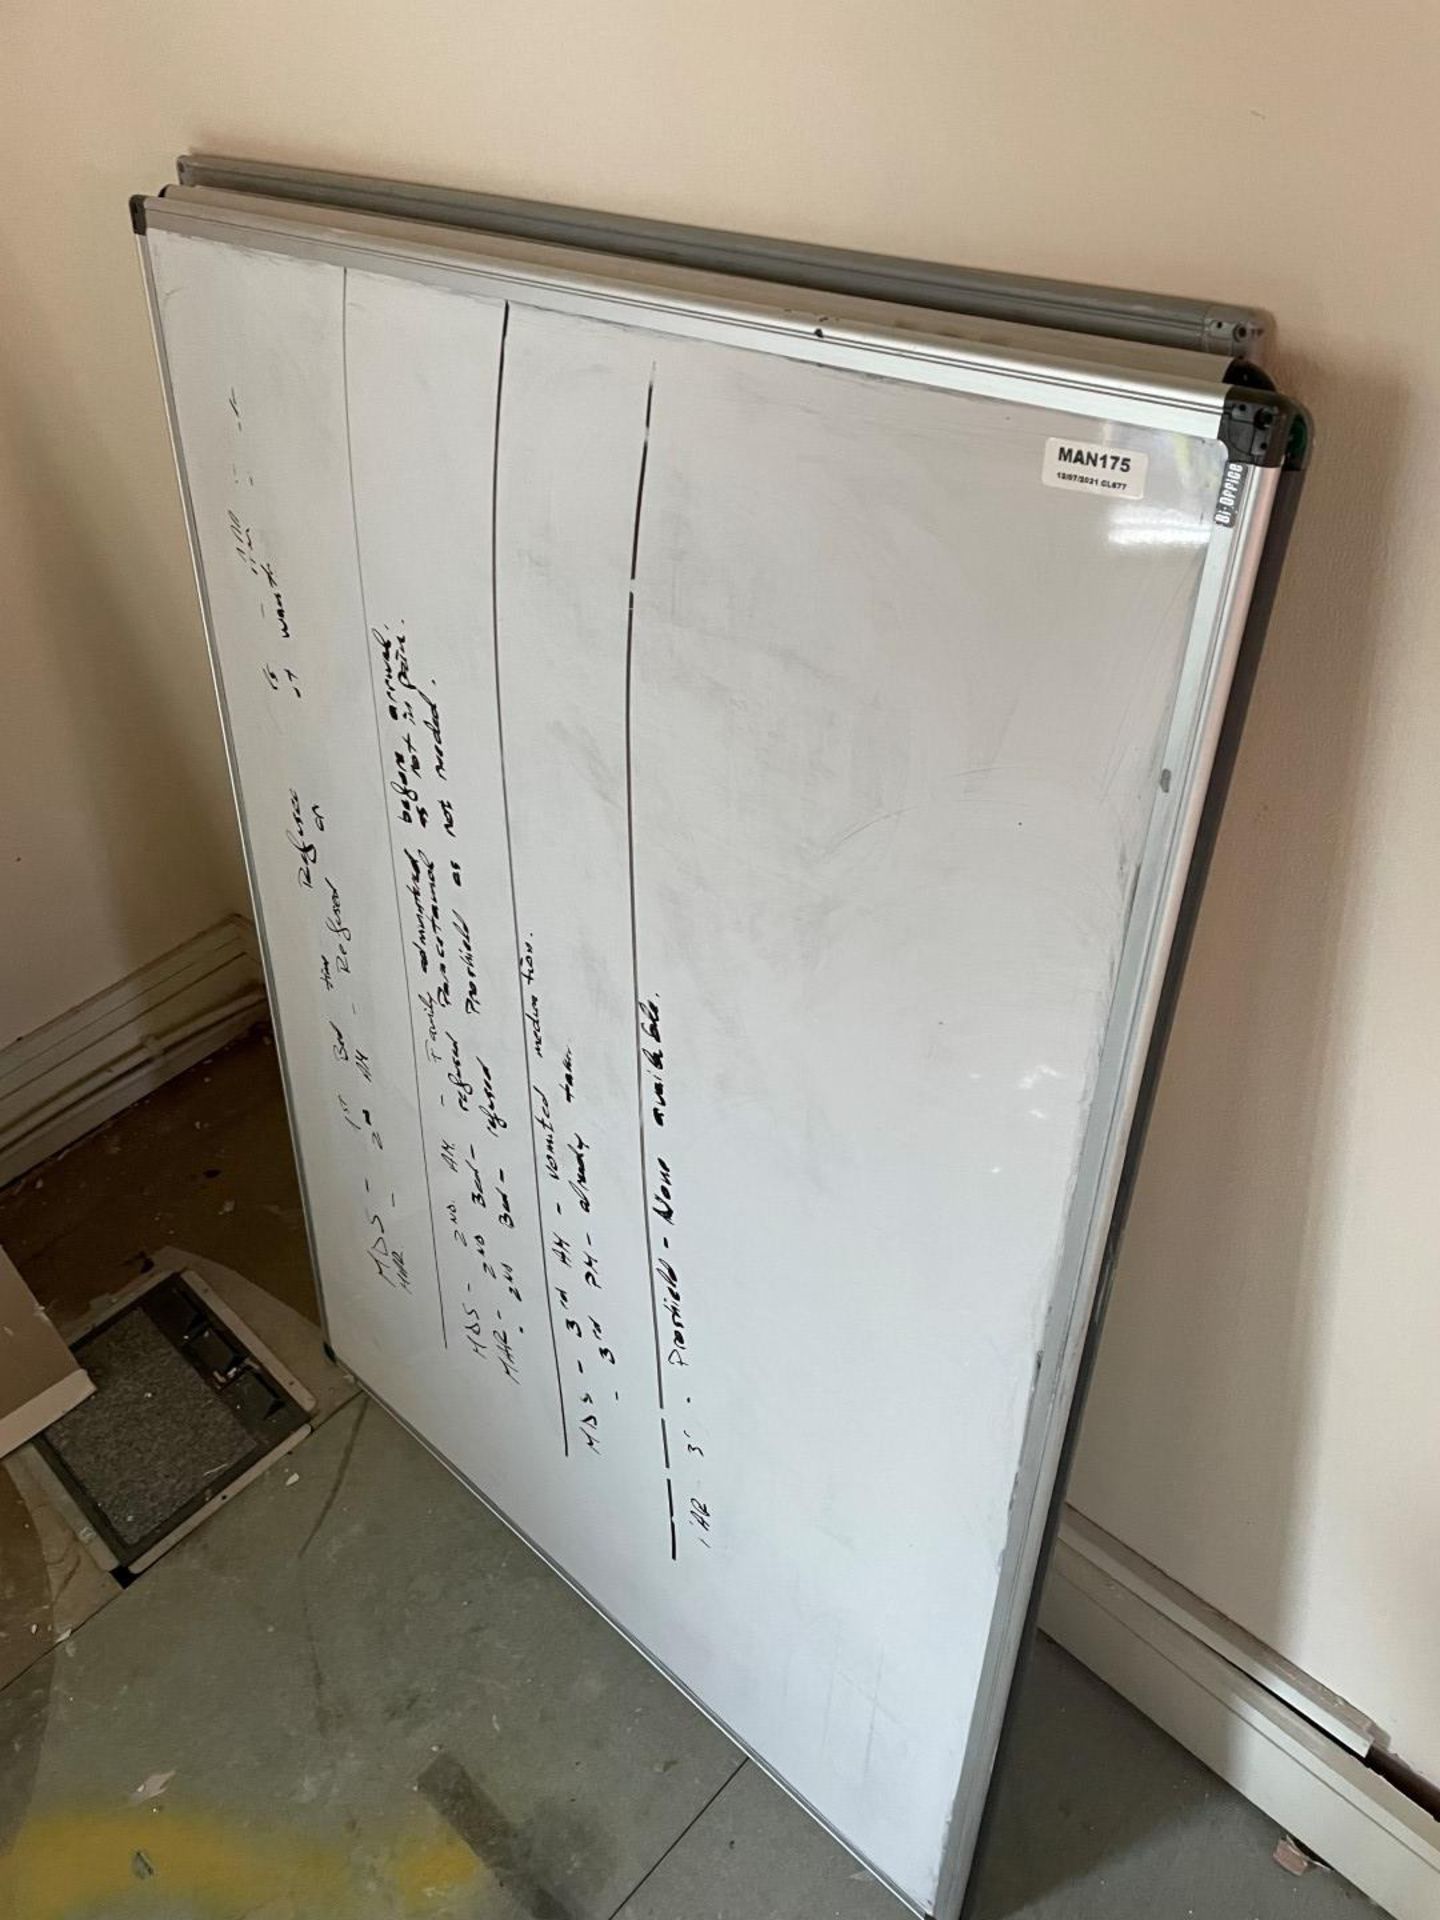 4 x Shield Whiteboards - Dimensions: H90 X W120 Cm - From A Working Office Environment - CL680 - - Image 2 of 3